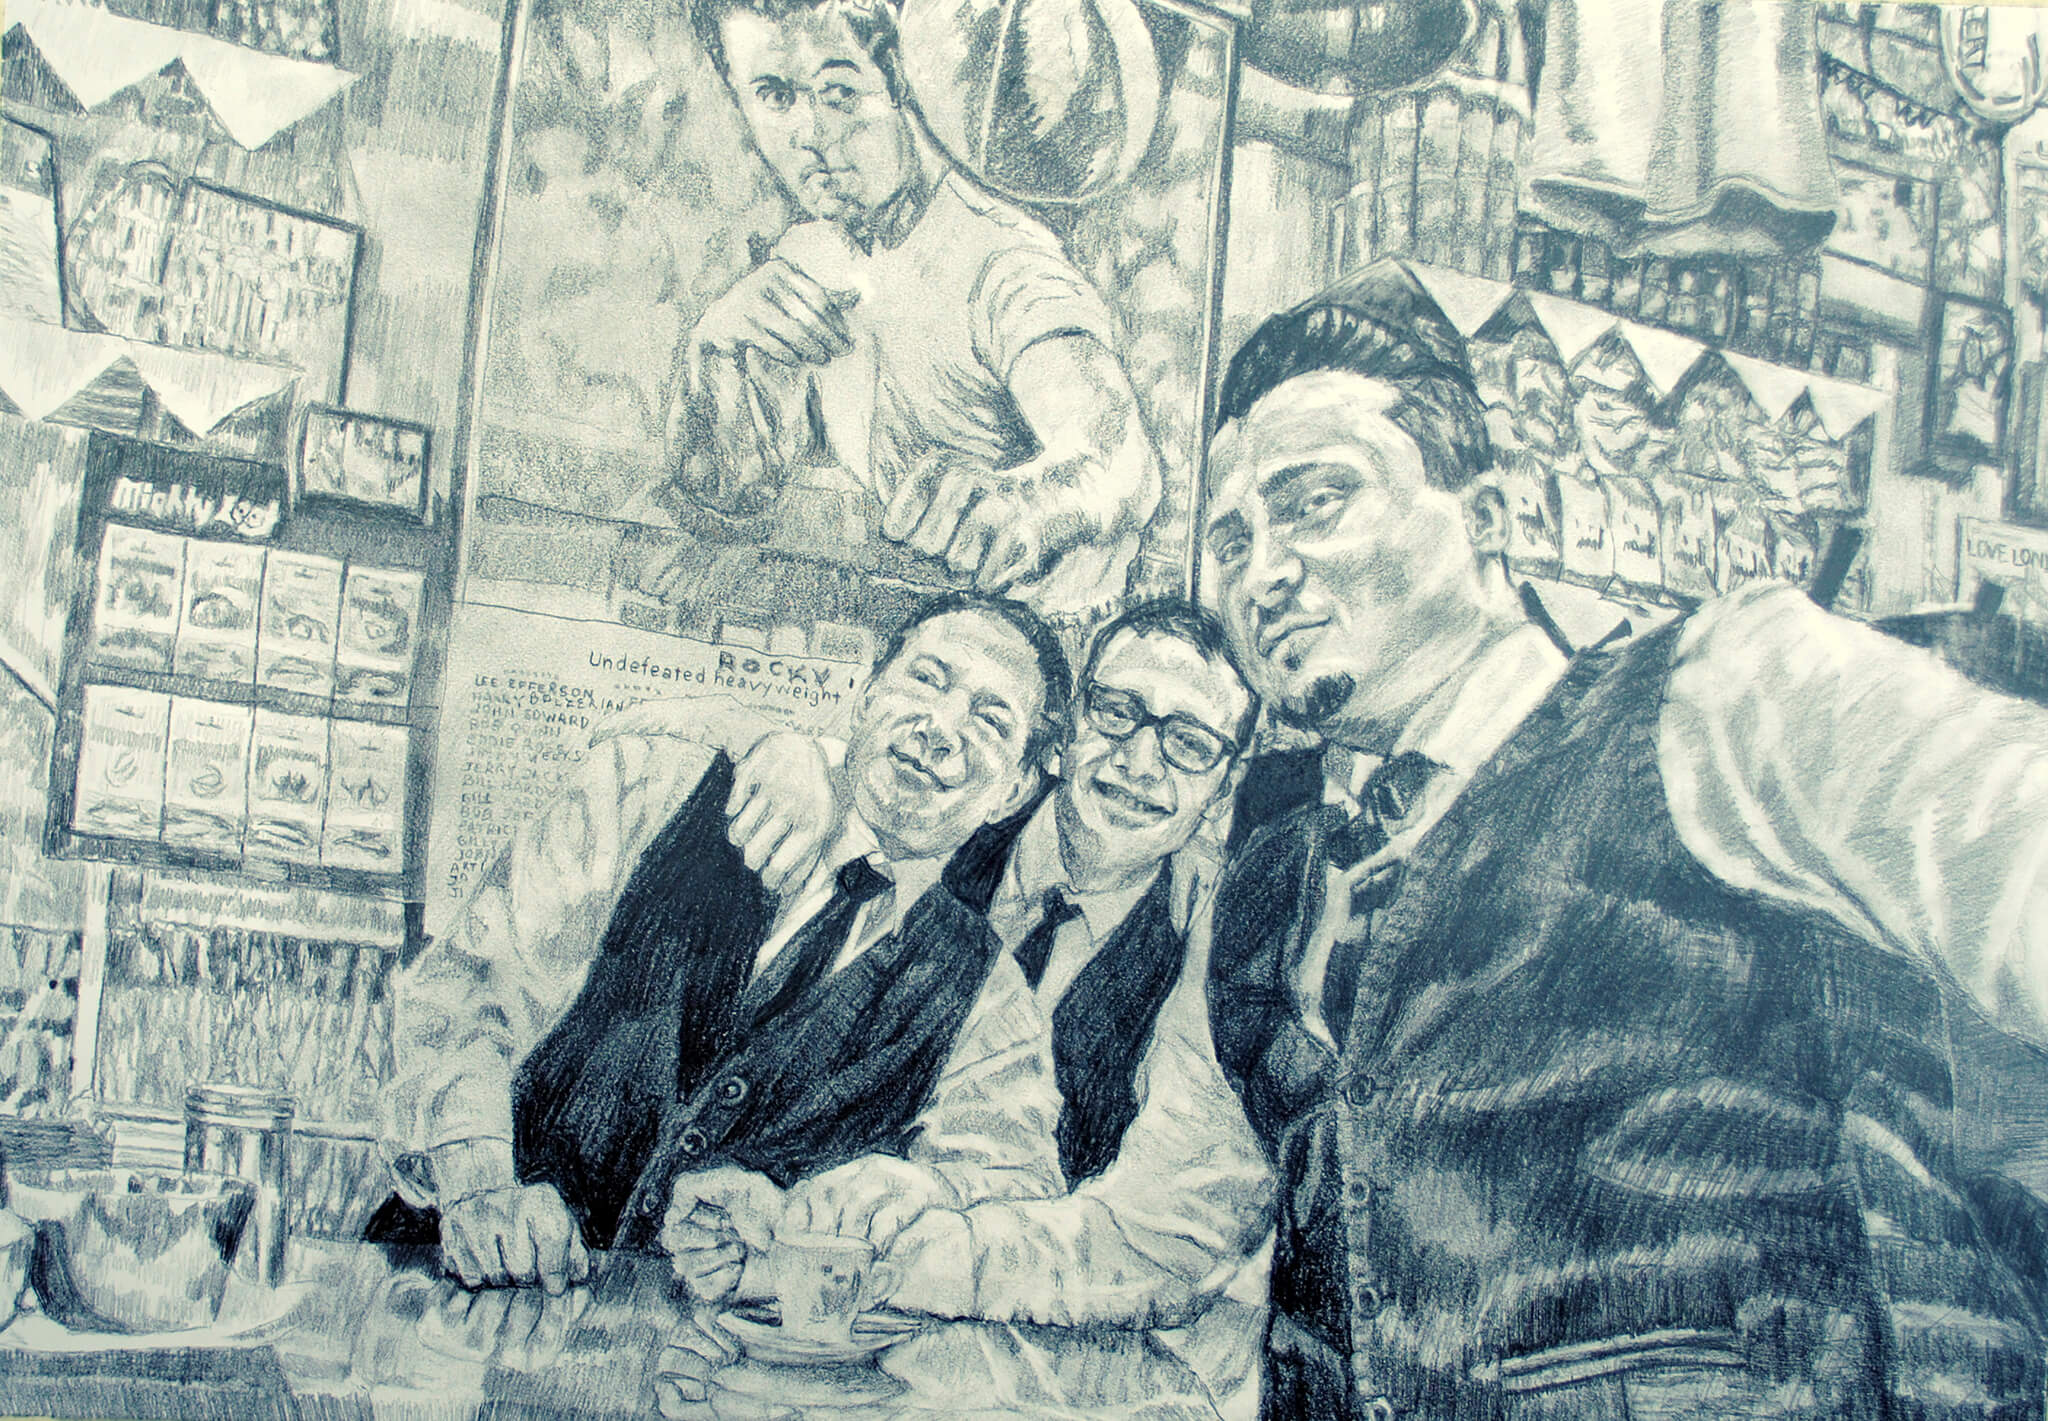 Bar Italia staff pencil on paper business portrait commission artwork by Stella Tooth